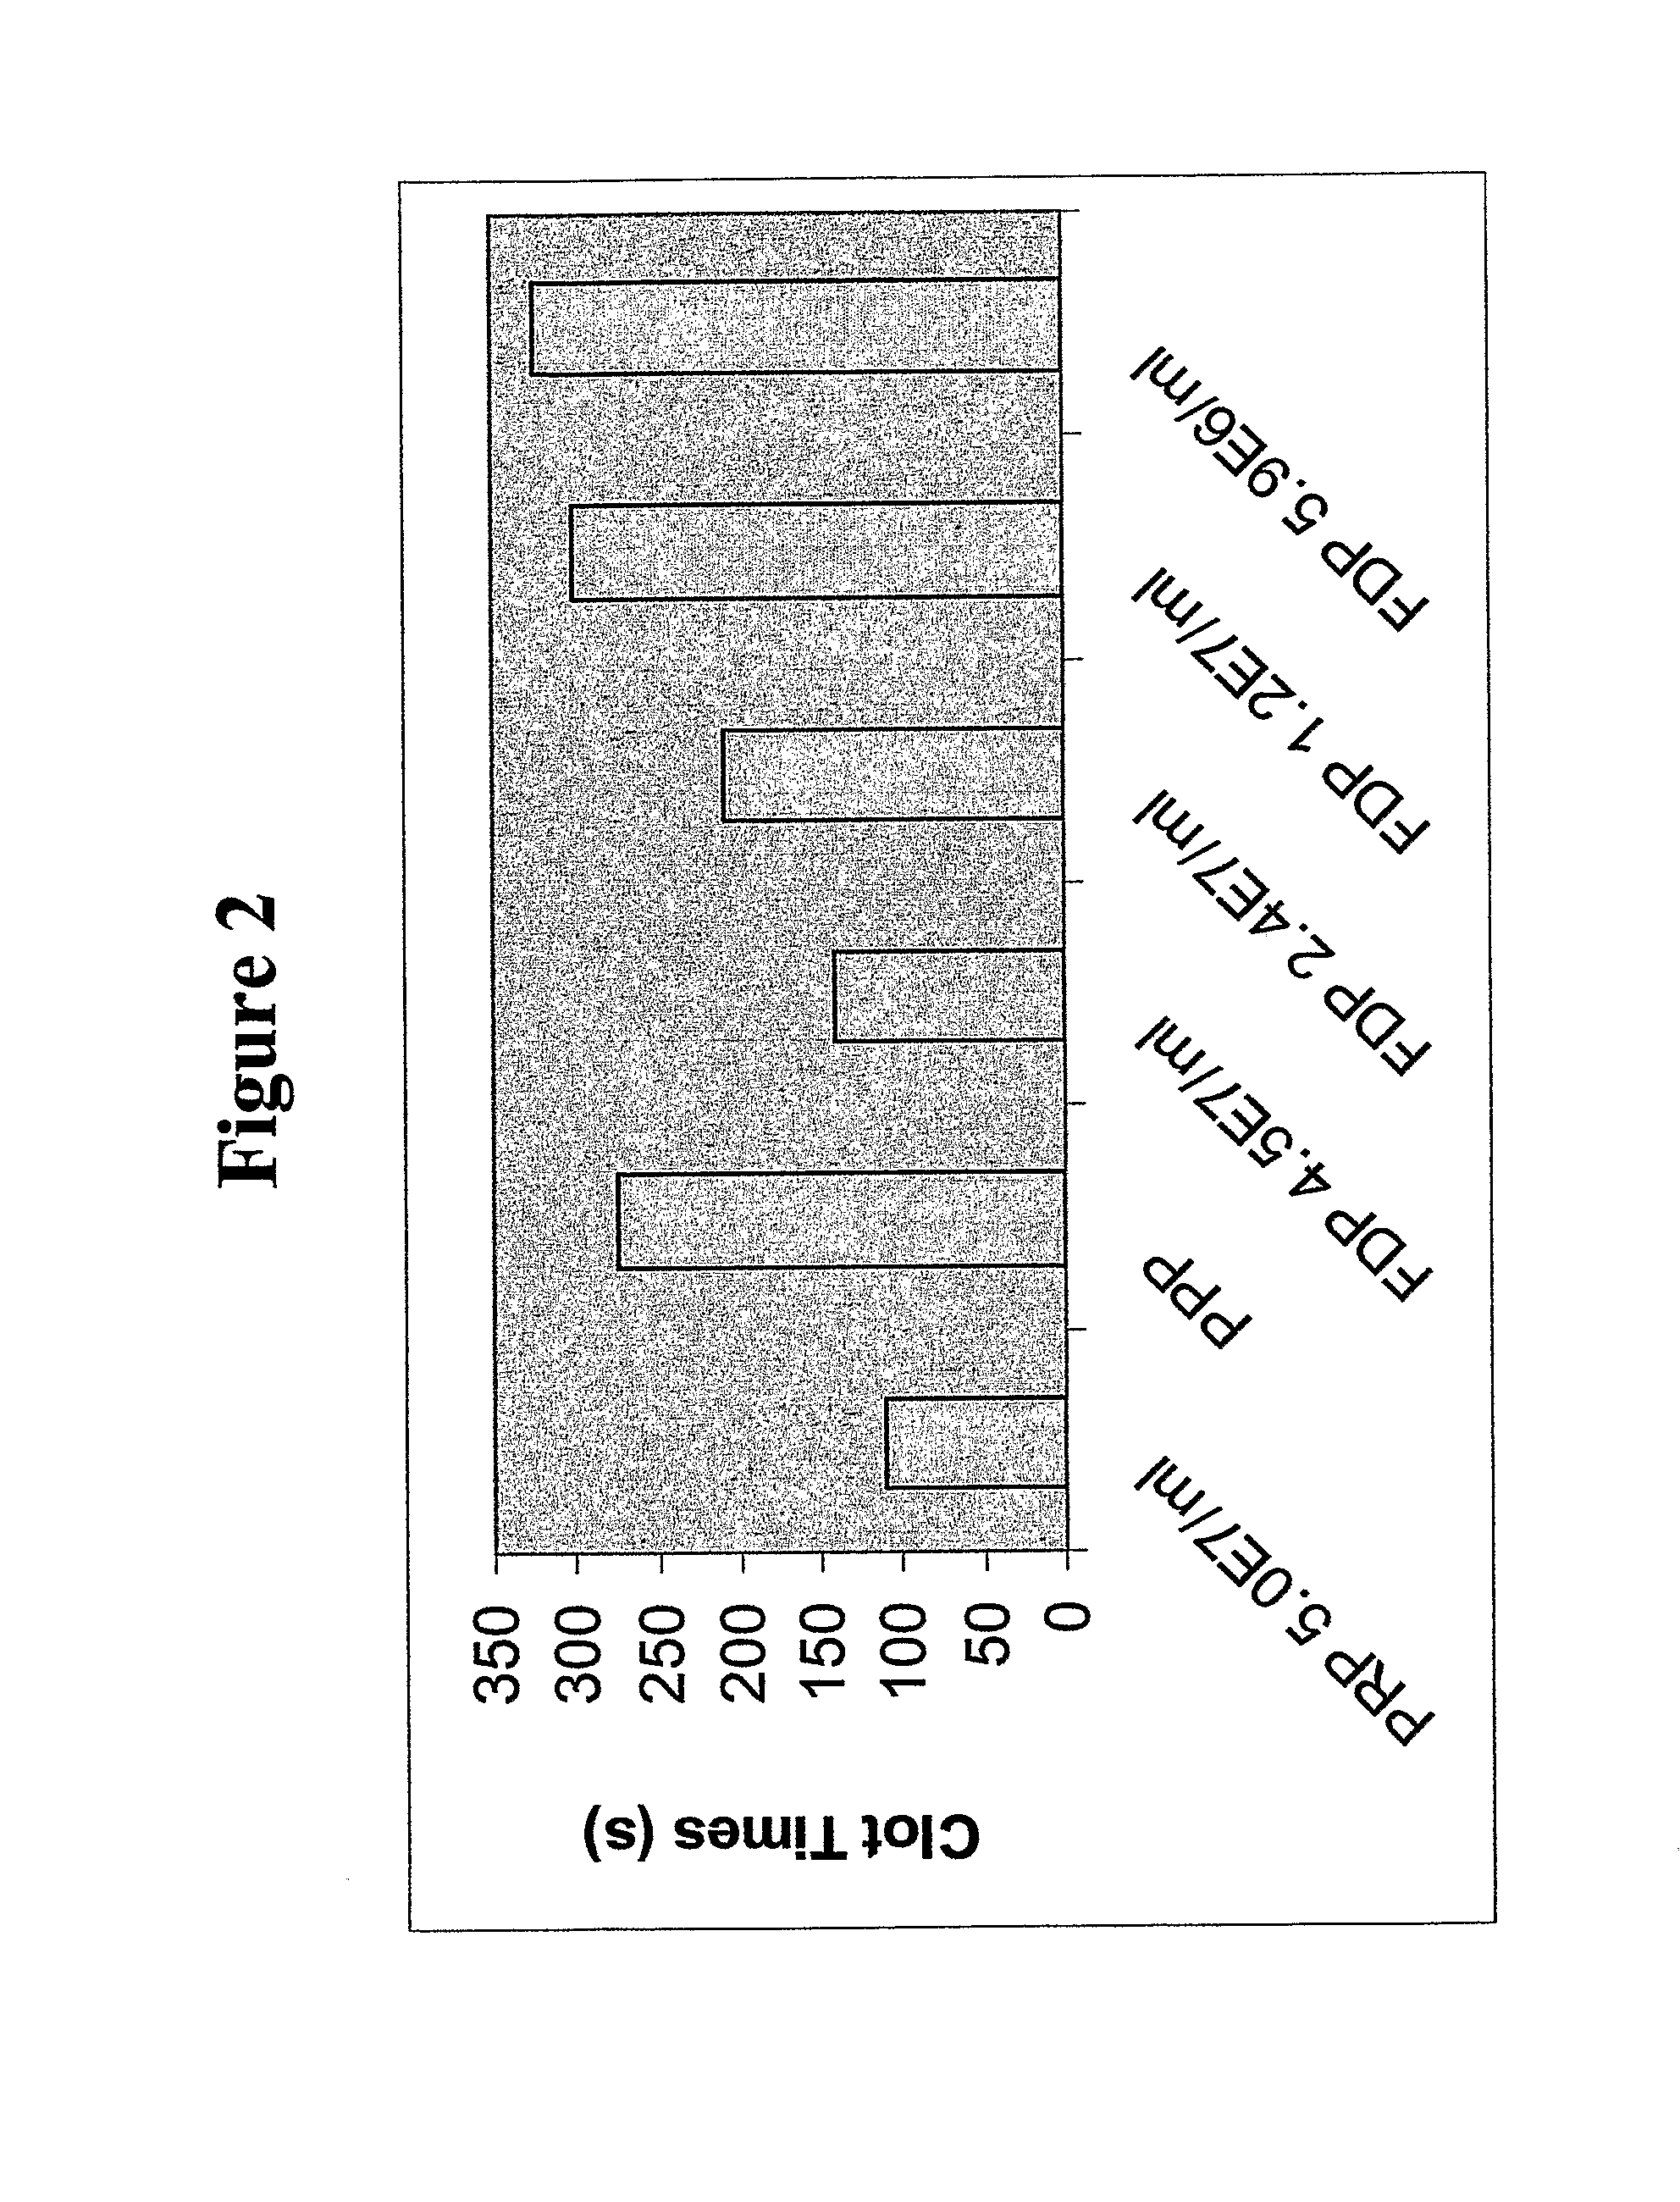 Methods for Preparing Freeze-Dried Platelets, Compositions Comprising Freeze-Dried Platelets, and Methods of Use